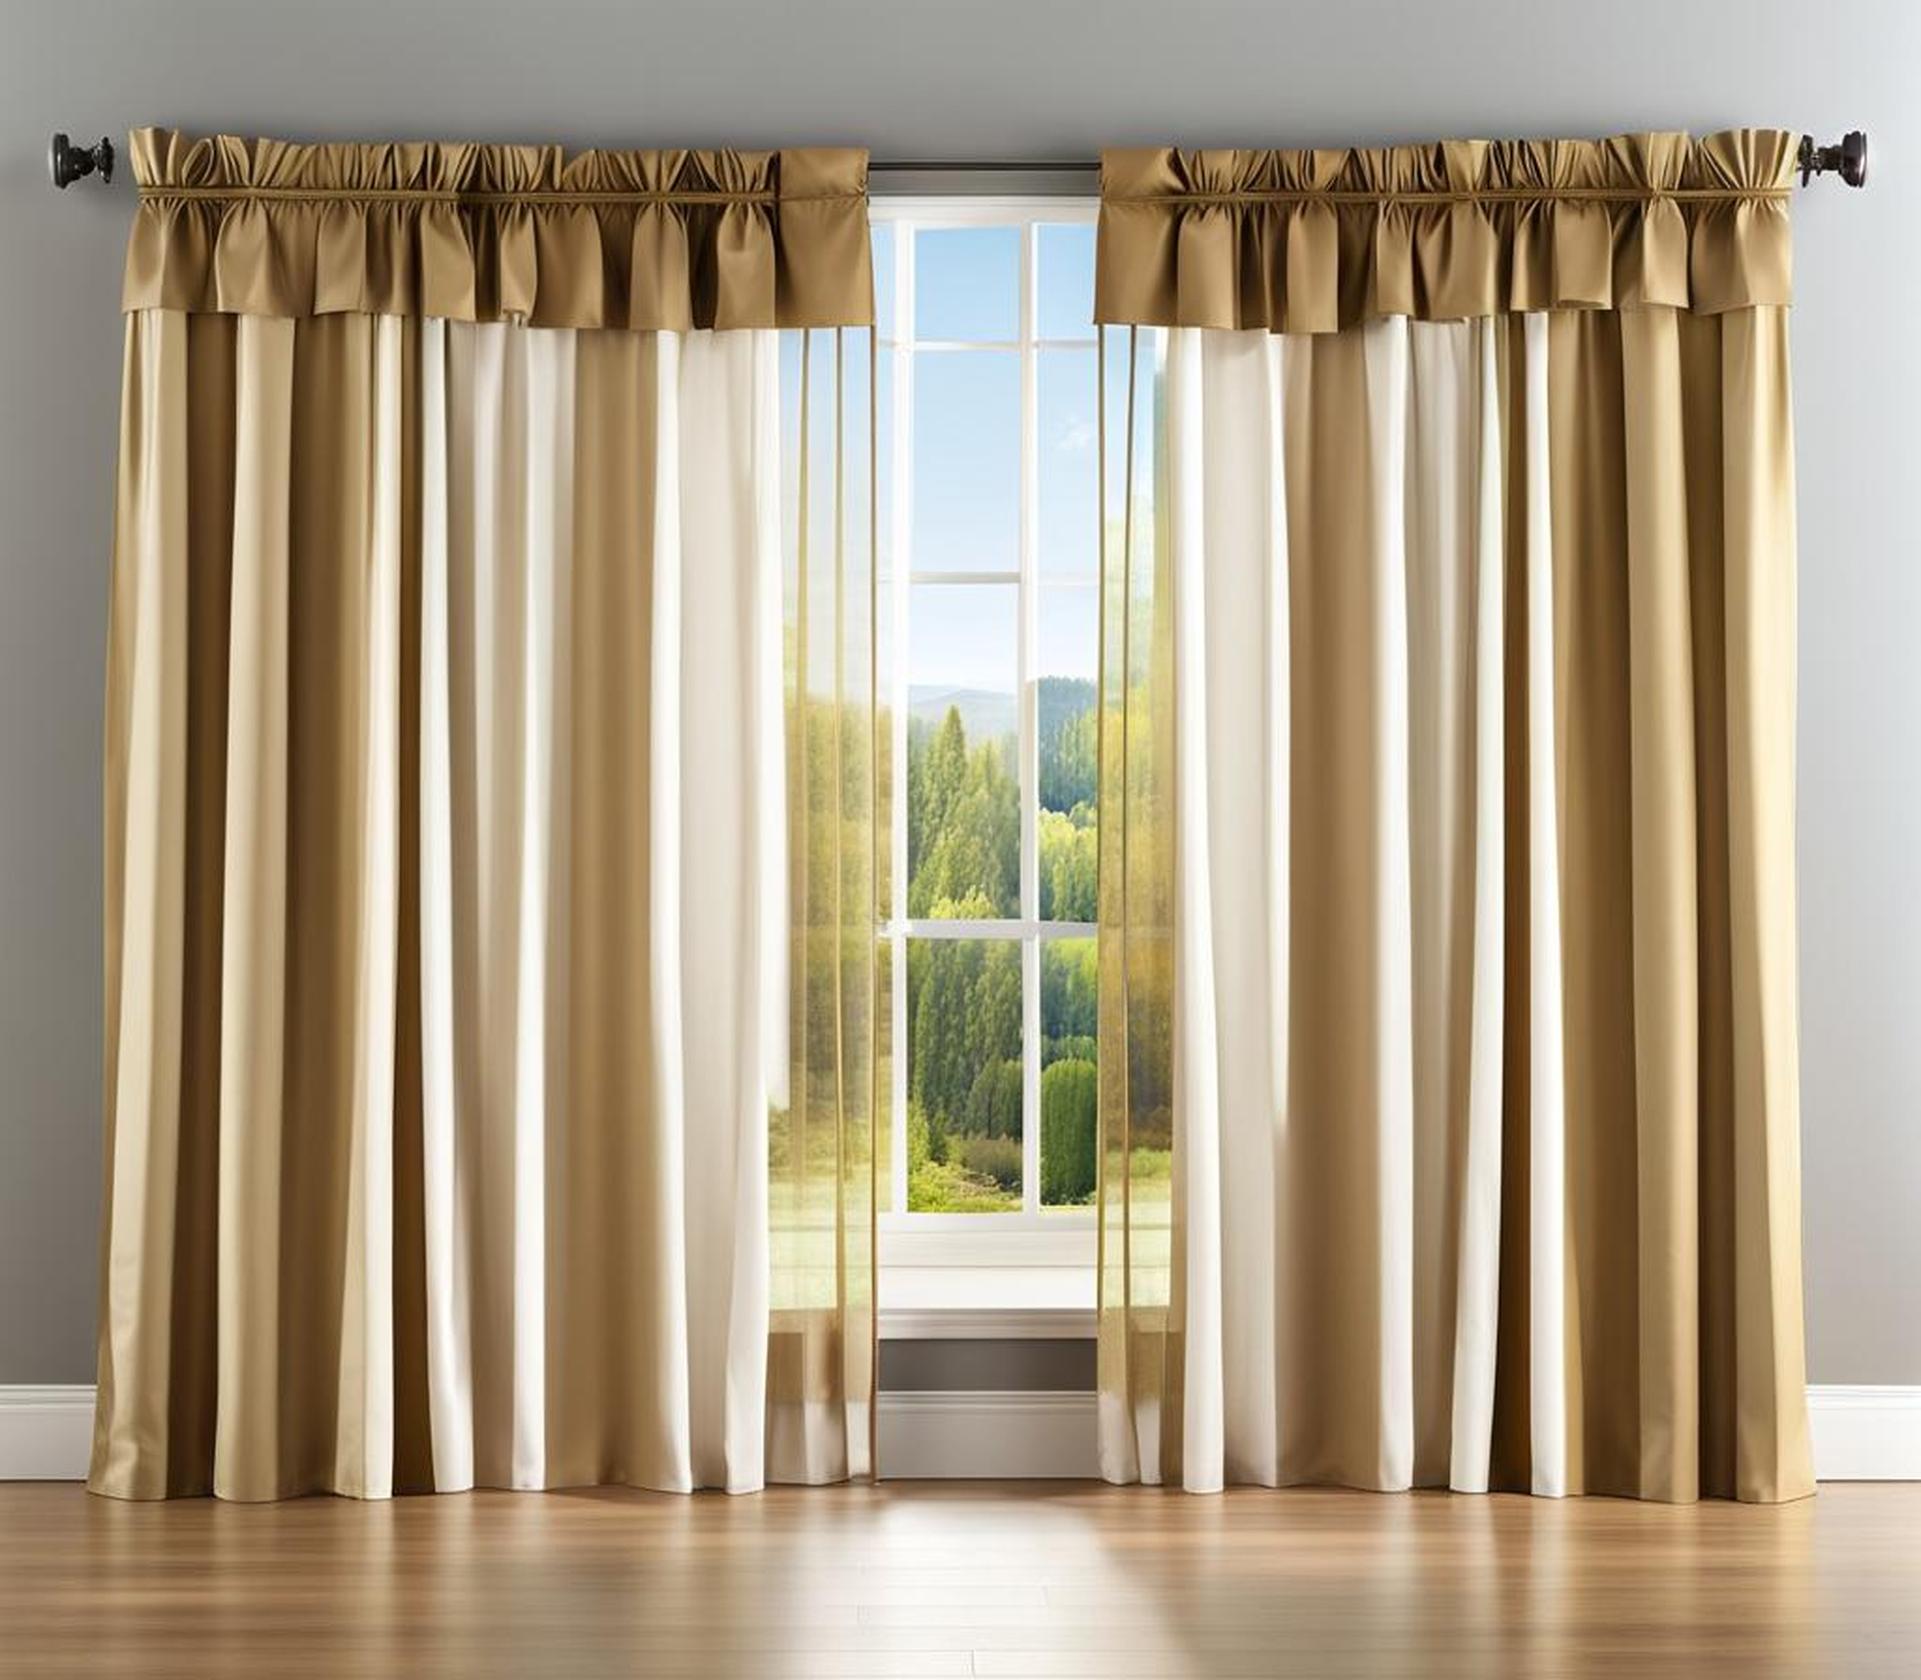 what are short curtains called